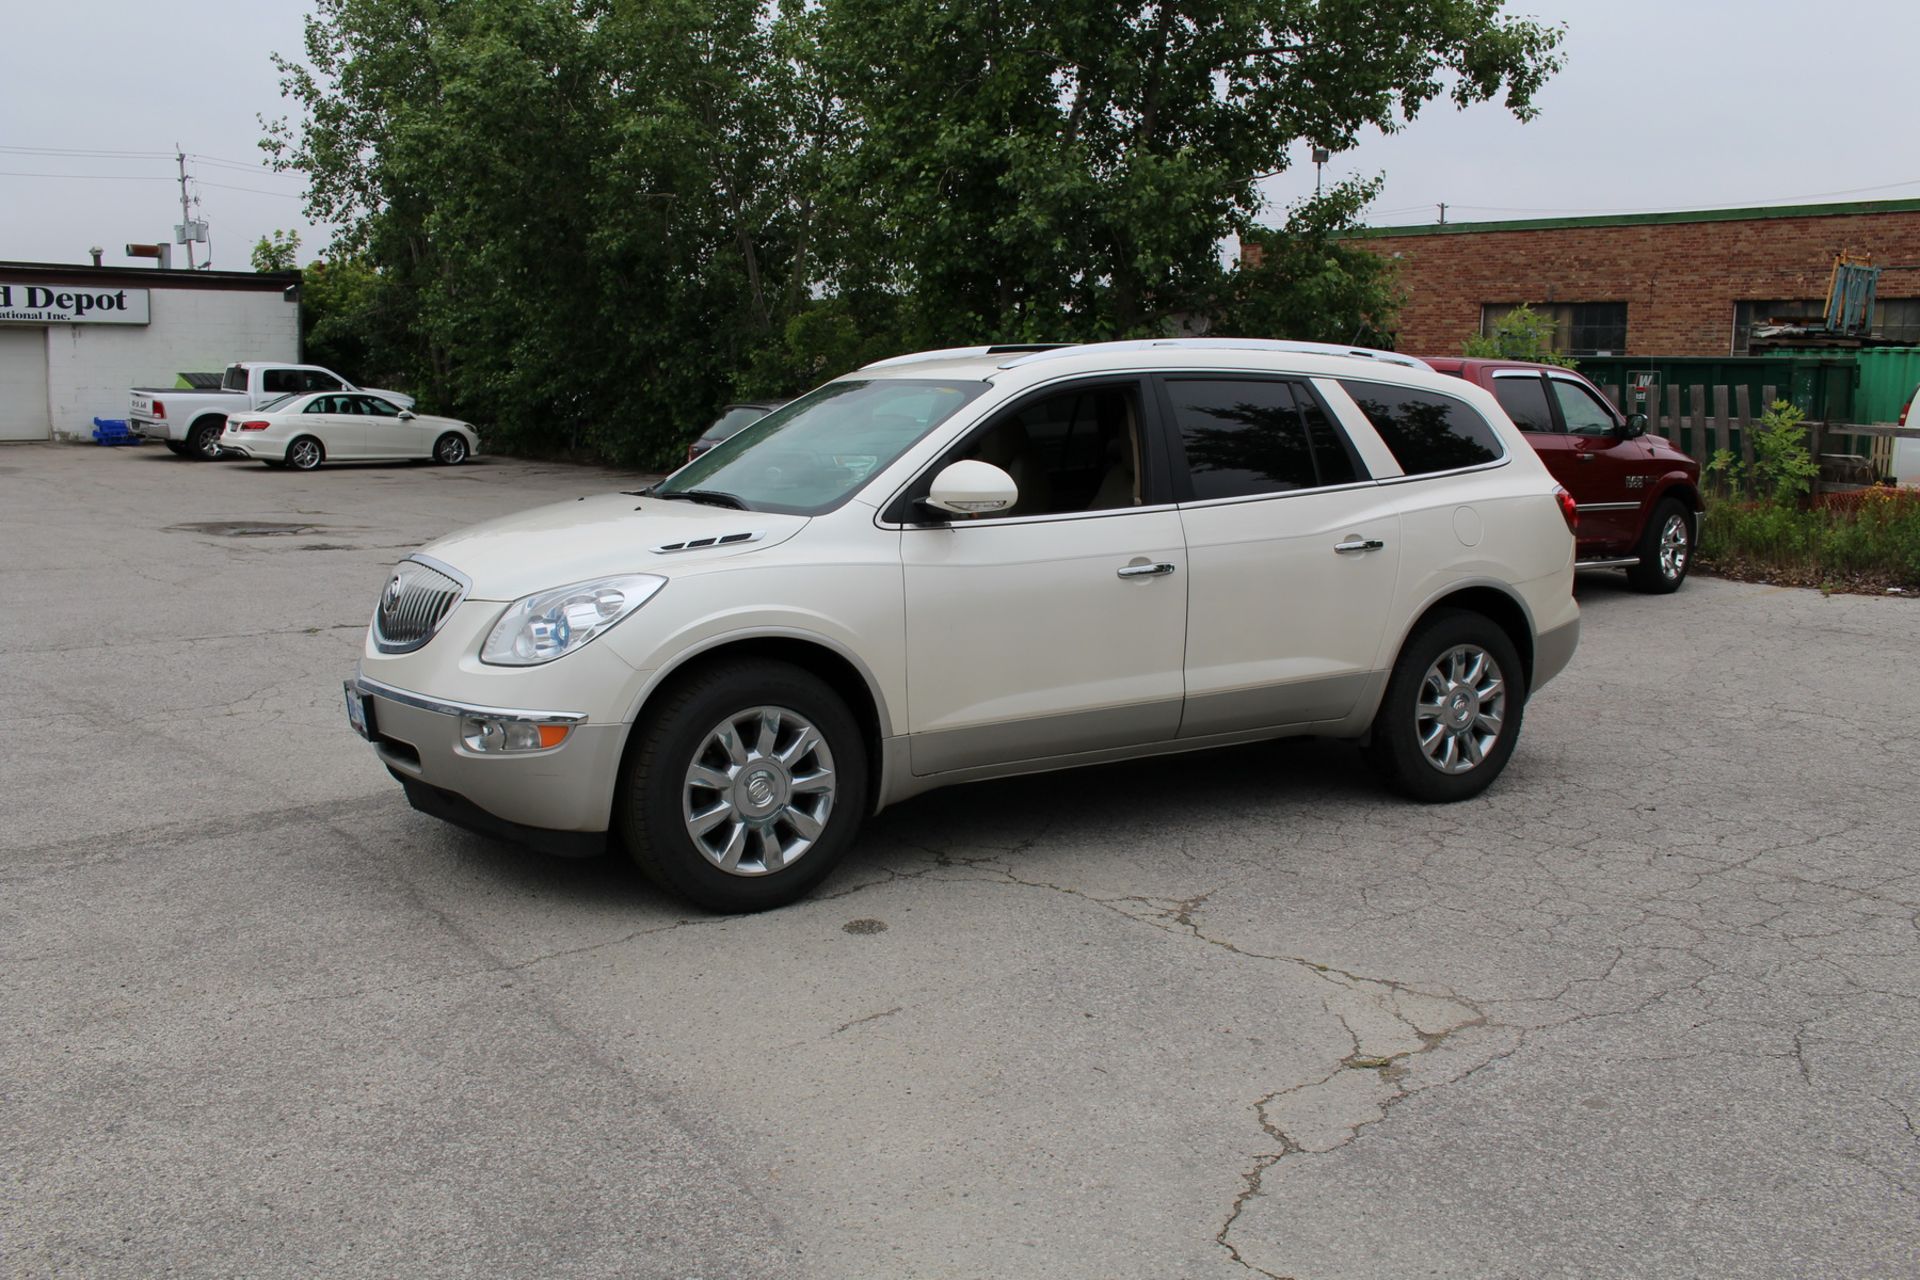 2011 BUICK MODEL ENCLAVE SUV W/ 3.6L V6 GAS ENGINE (APPROX. 218,000 KM), VIN 5GAKRCED2BJ397396 ( - Image 2 of 4